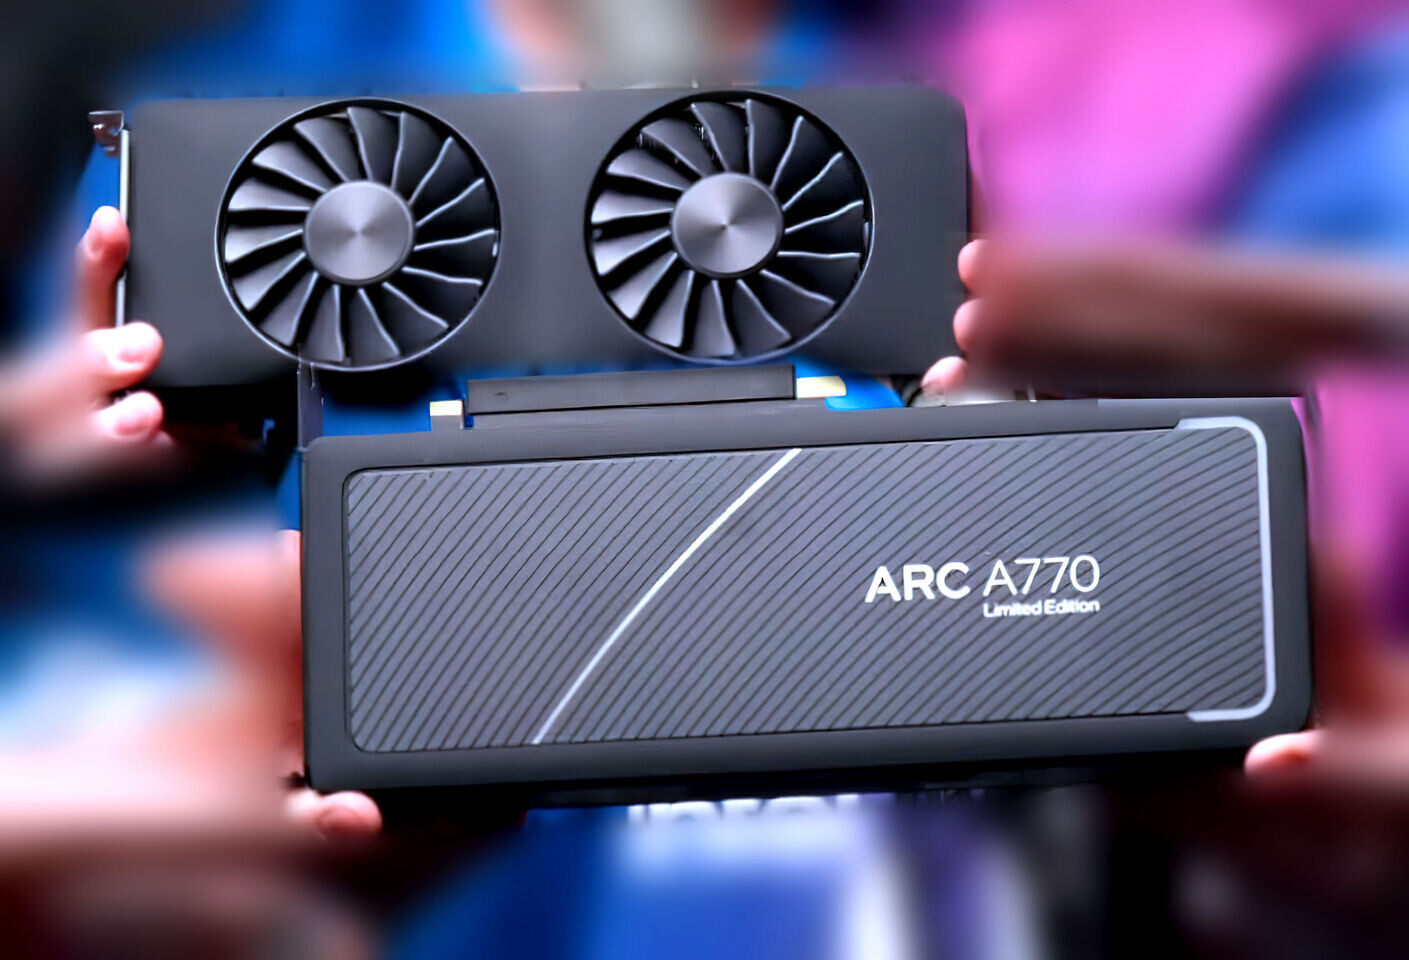 Flagship Intel Arc A770 GPU Showcased in Blender with Ray Tracing